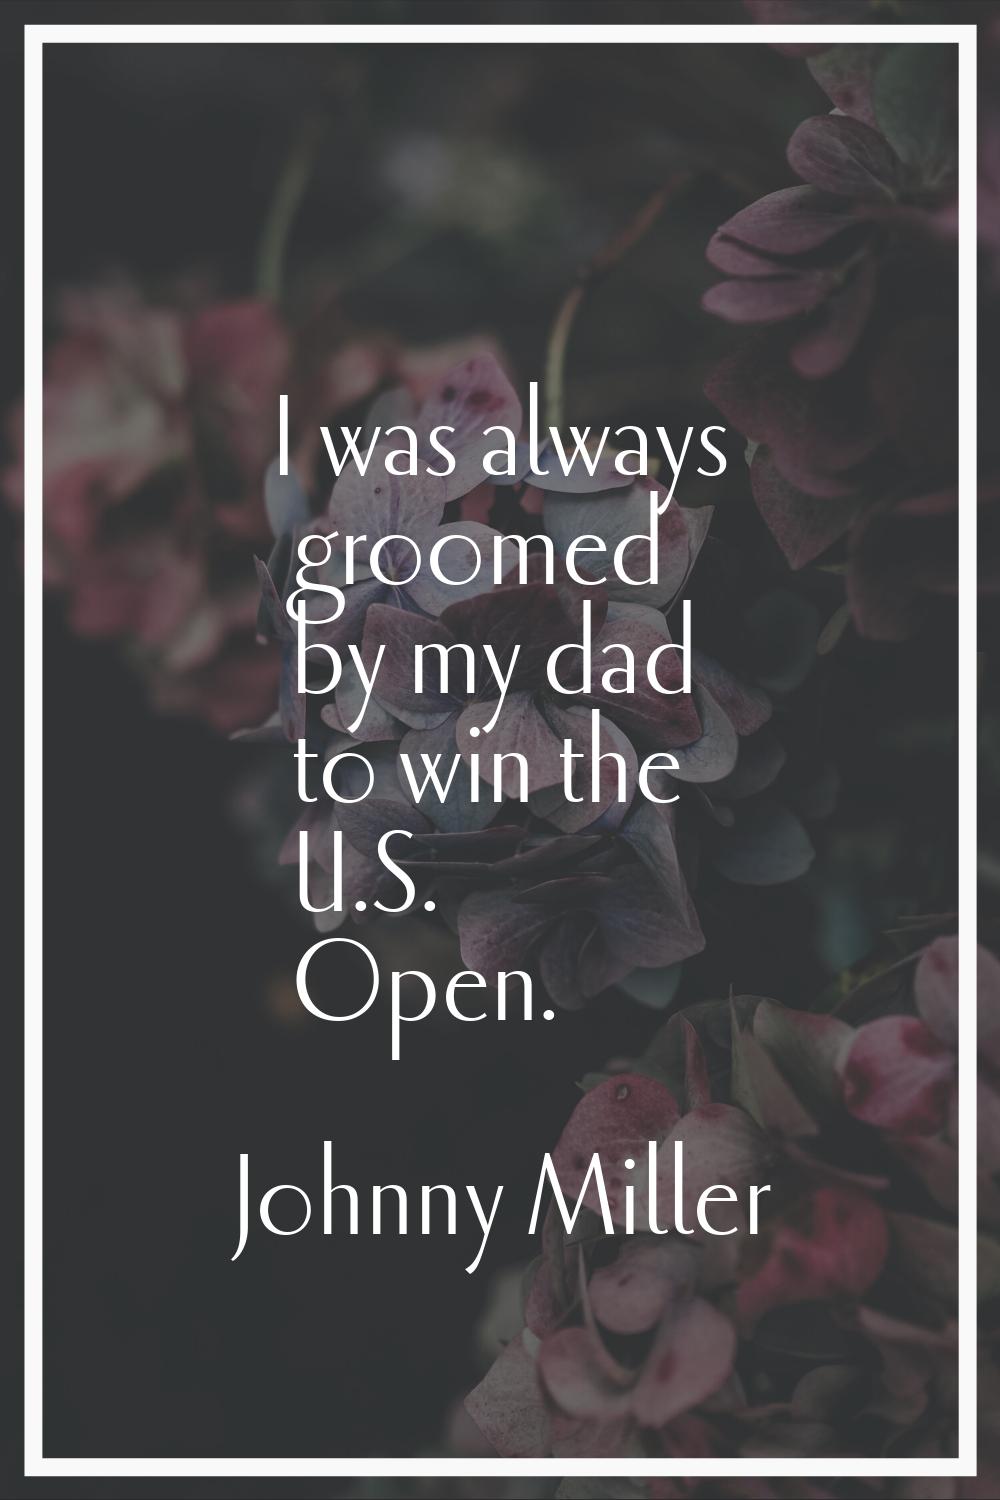 I was always groomed by my dad to win the U.S. Open.